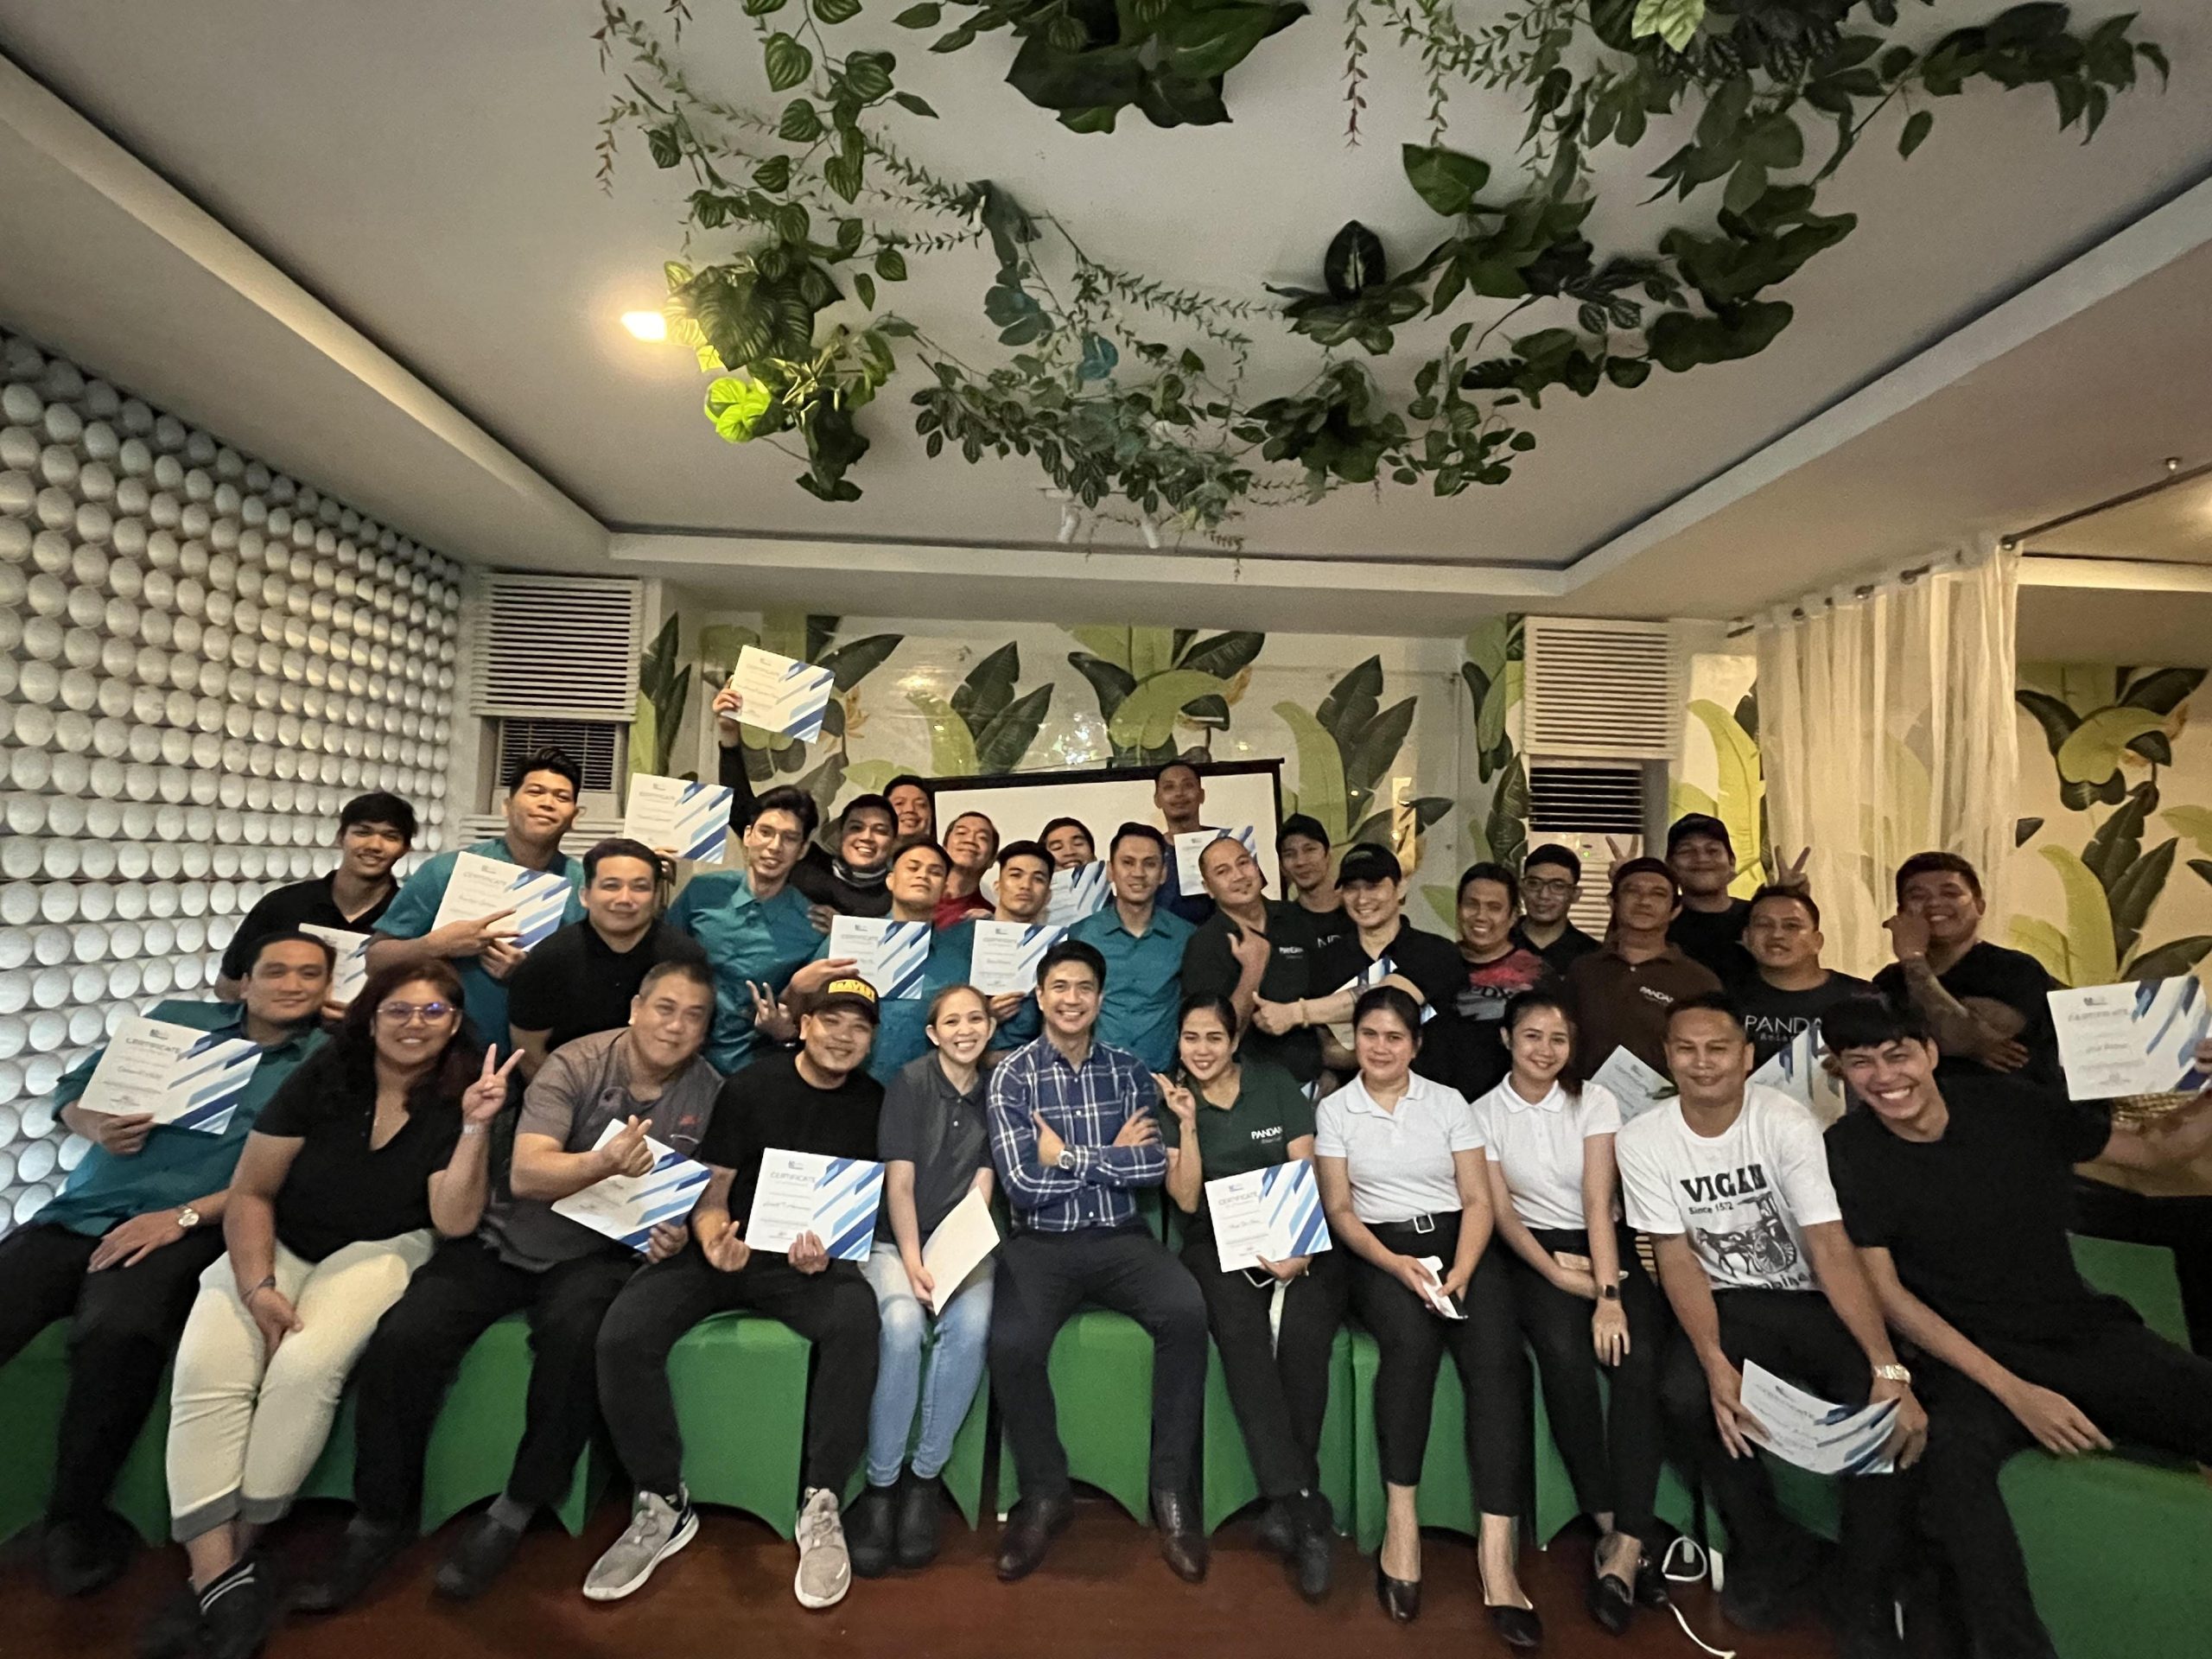 Customer Service and Basic Food Safety Trainingfor Pandan Asian Cafe and Azadore